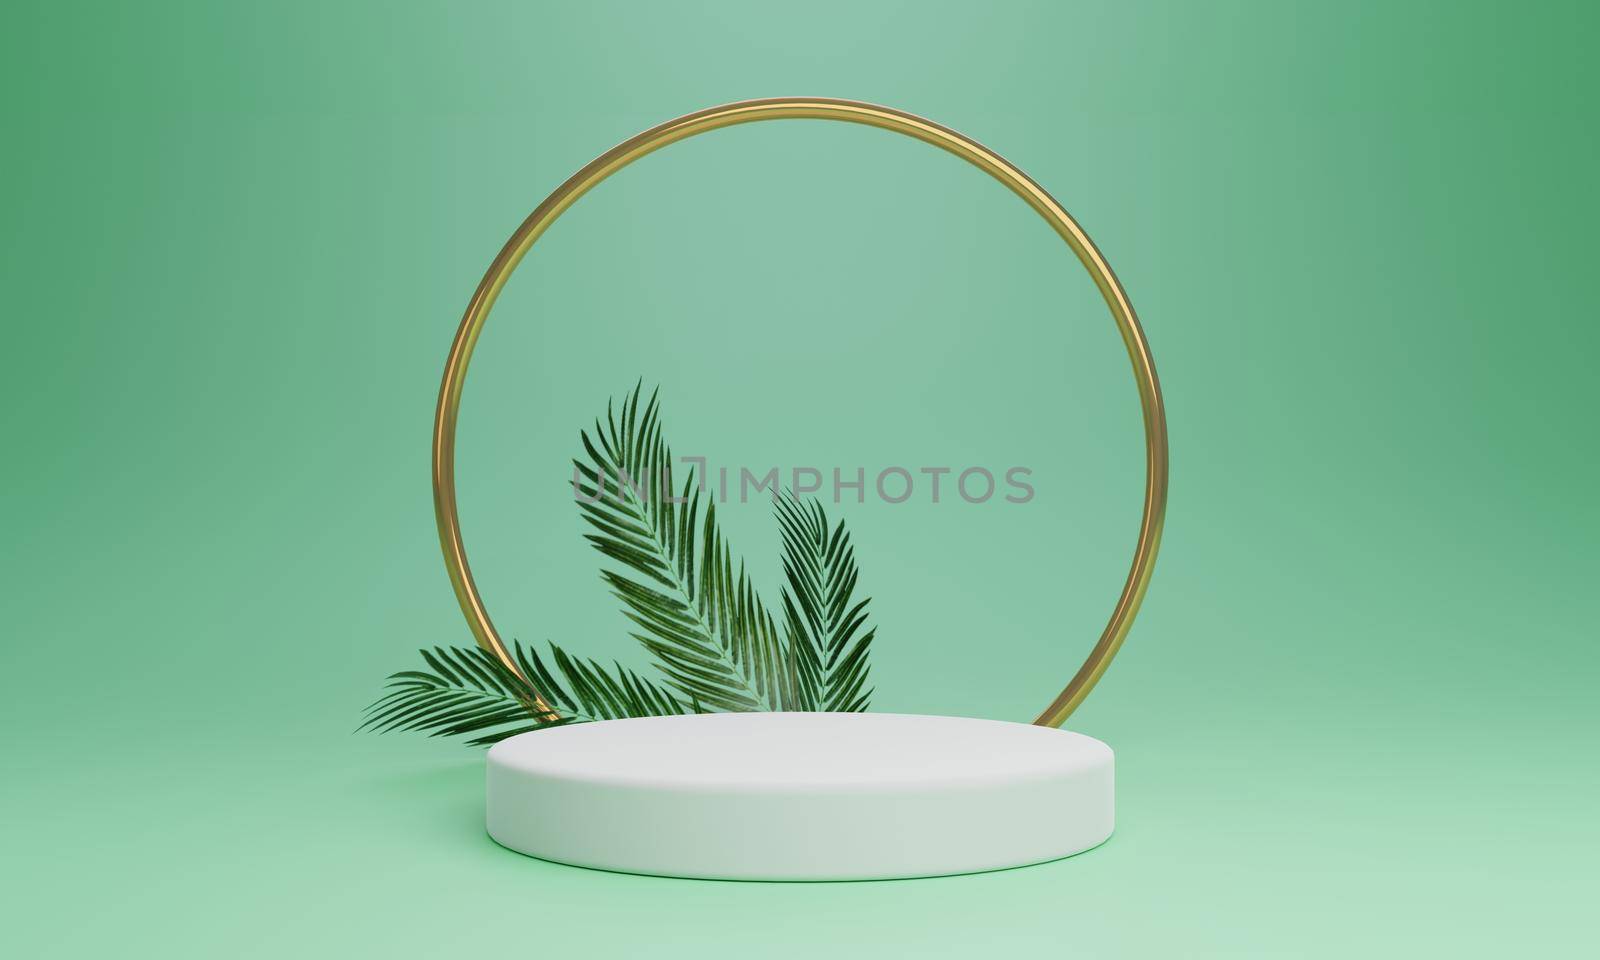 Minimal product podium stage with green pastel color and coconut leaves in geometric shape for presentation background. Abstract background and decoration scene template. 3D illustration rendering